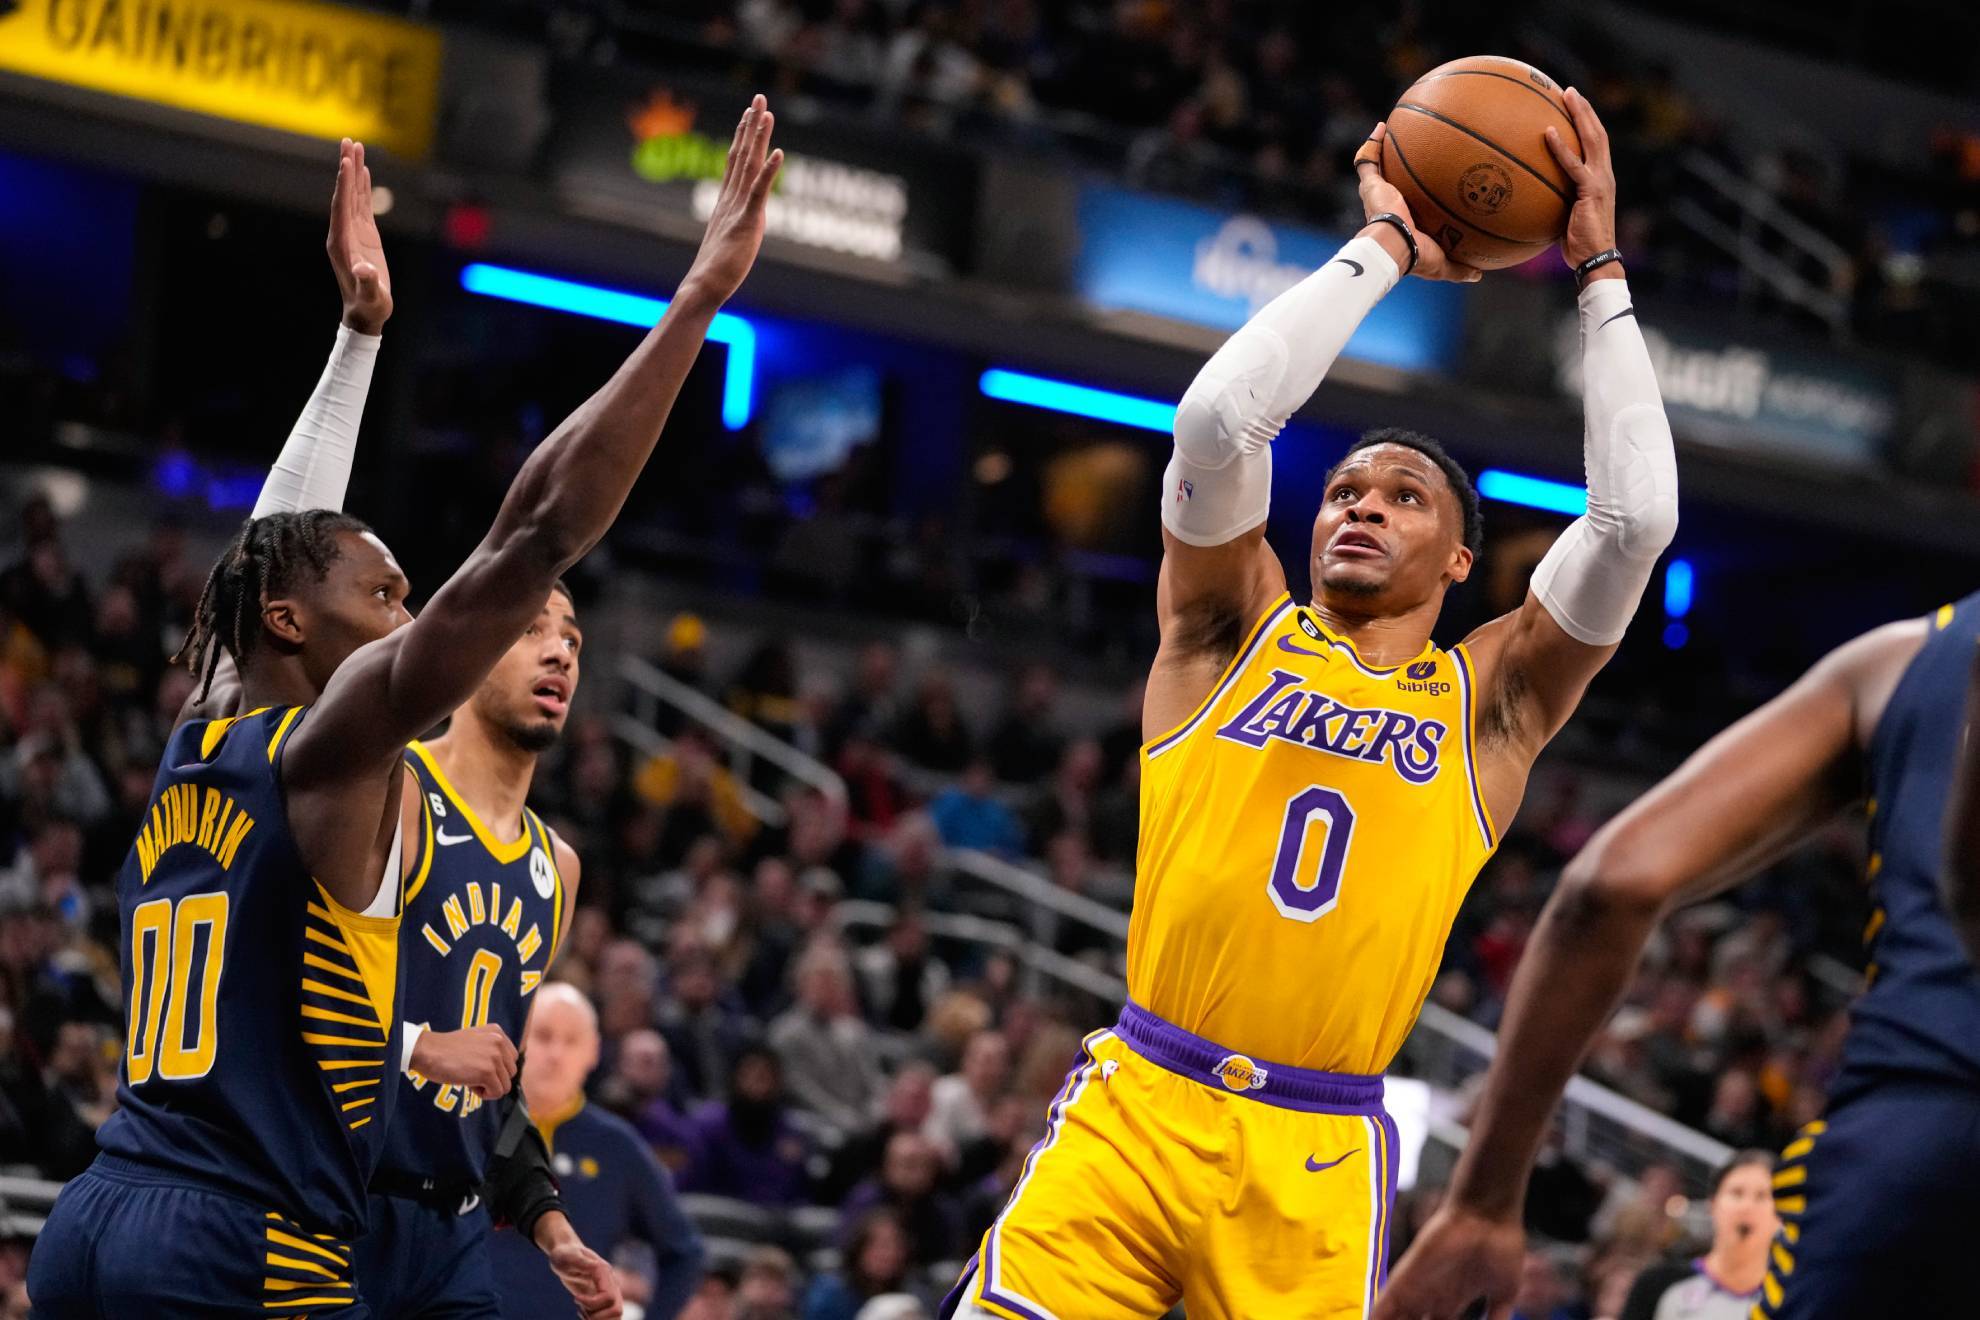 Los Angeles Lakers guard Russell Westbrook (0) shoots over Indiana Pacers guard Bennedict Mathurin (00) during the first half of an NBA basketball game in Indianapolis